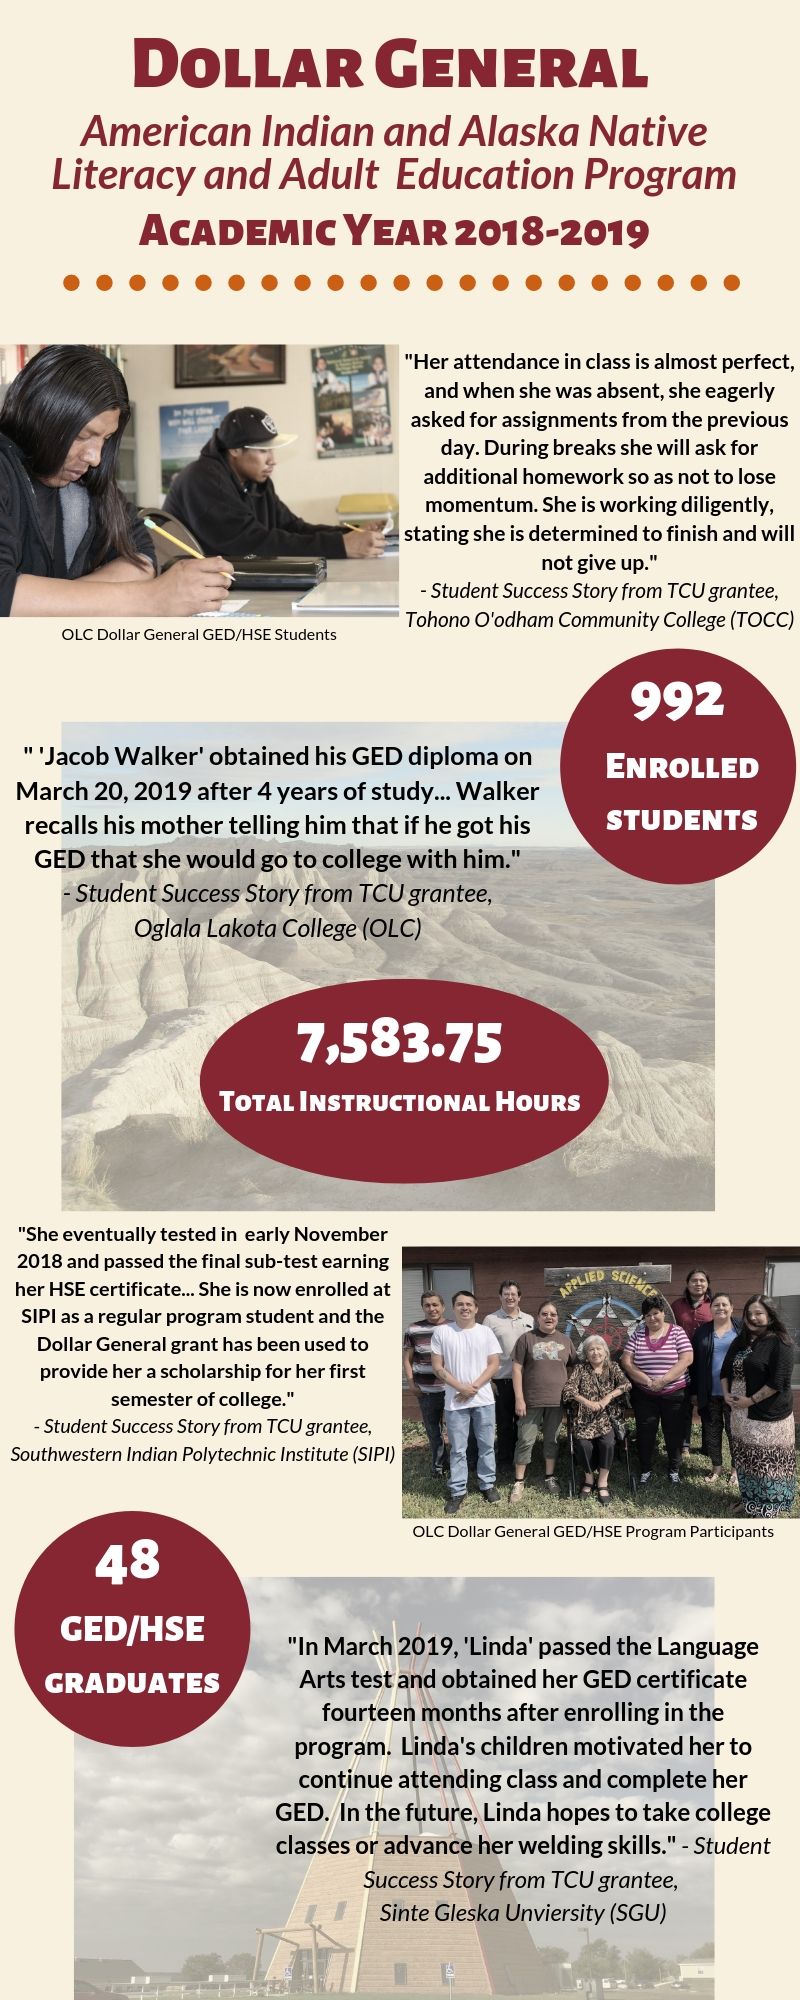 Click to view infographic and see how both quantitative and qualitative data demonstrate the impact of the Dollar General program on TCUs’ respective GED programs as well as on individuals’ work ethics, relationships, and future aspirations.